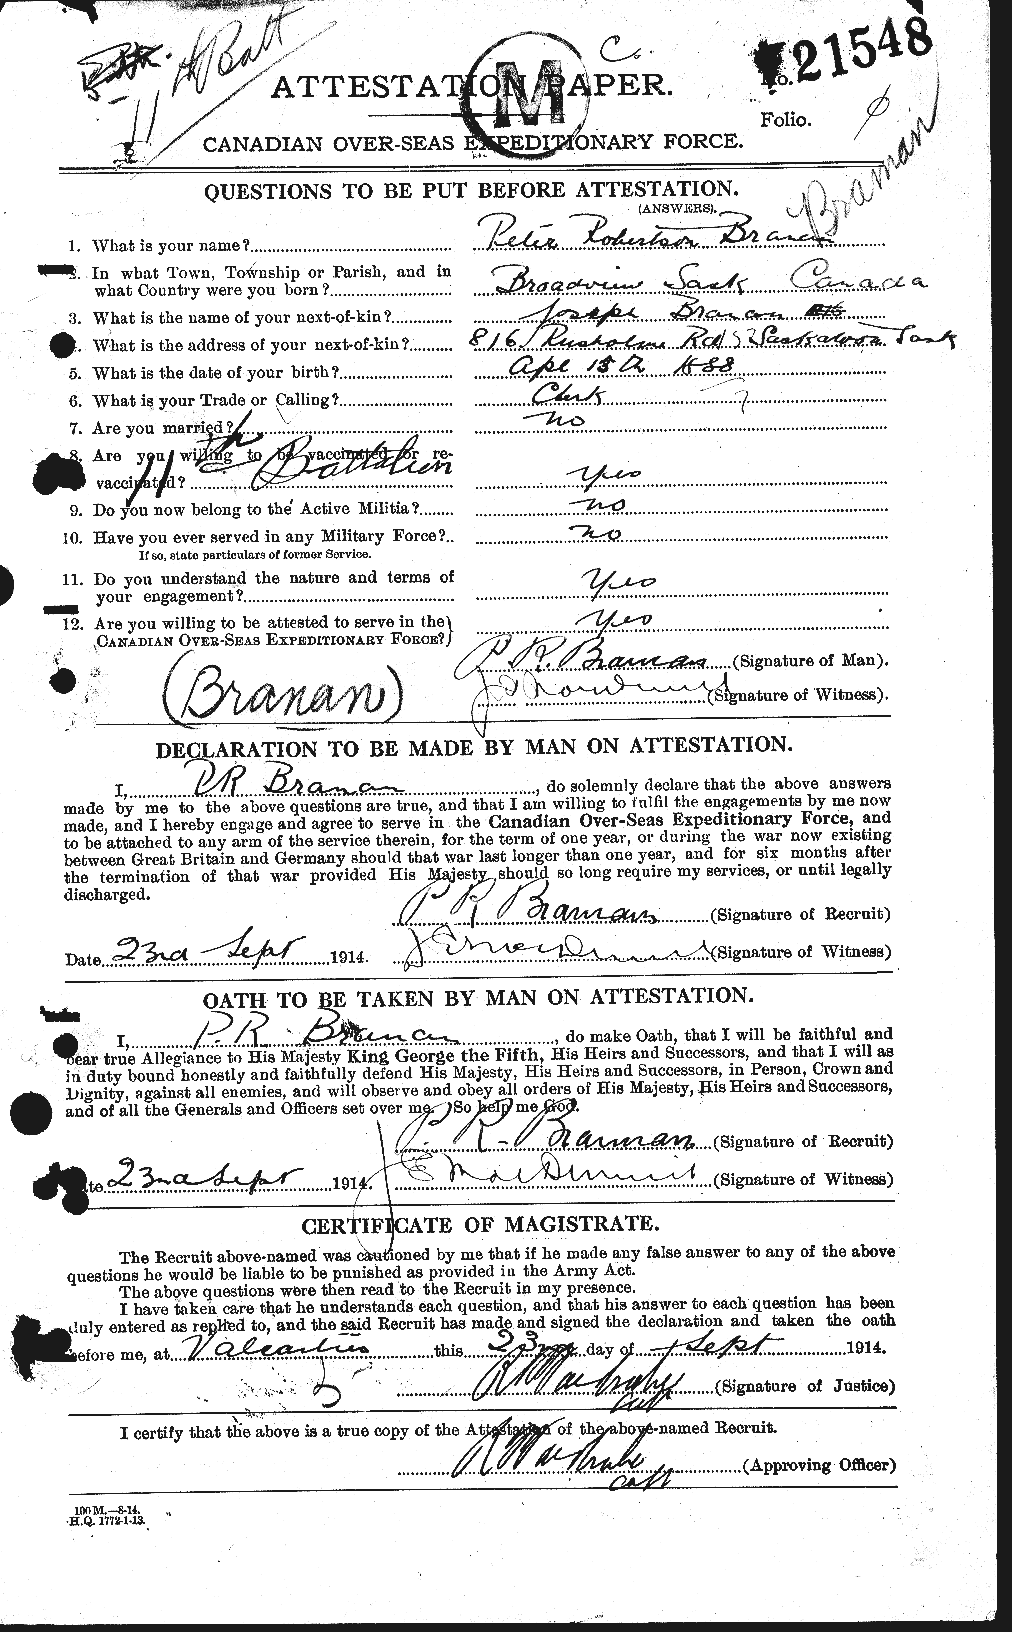 Personnel Records of the First World War - CEF 259650a